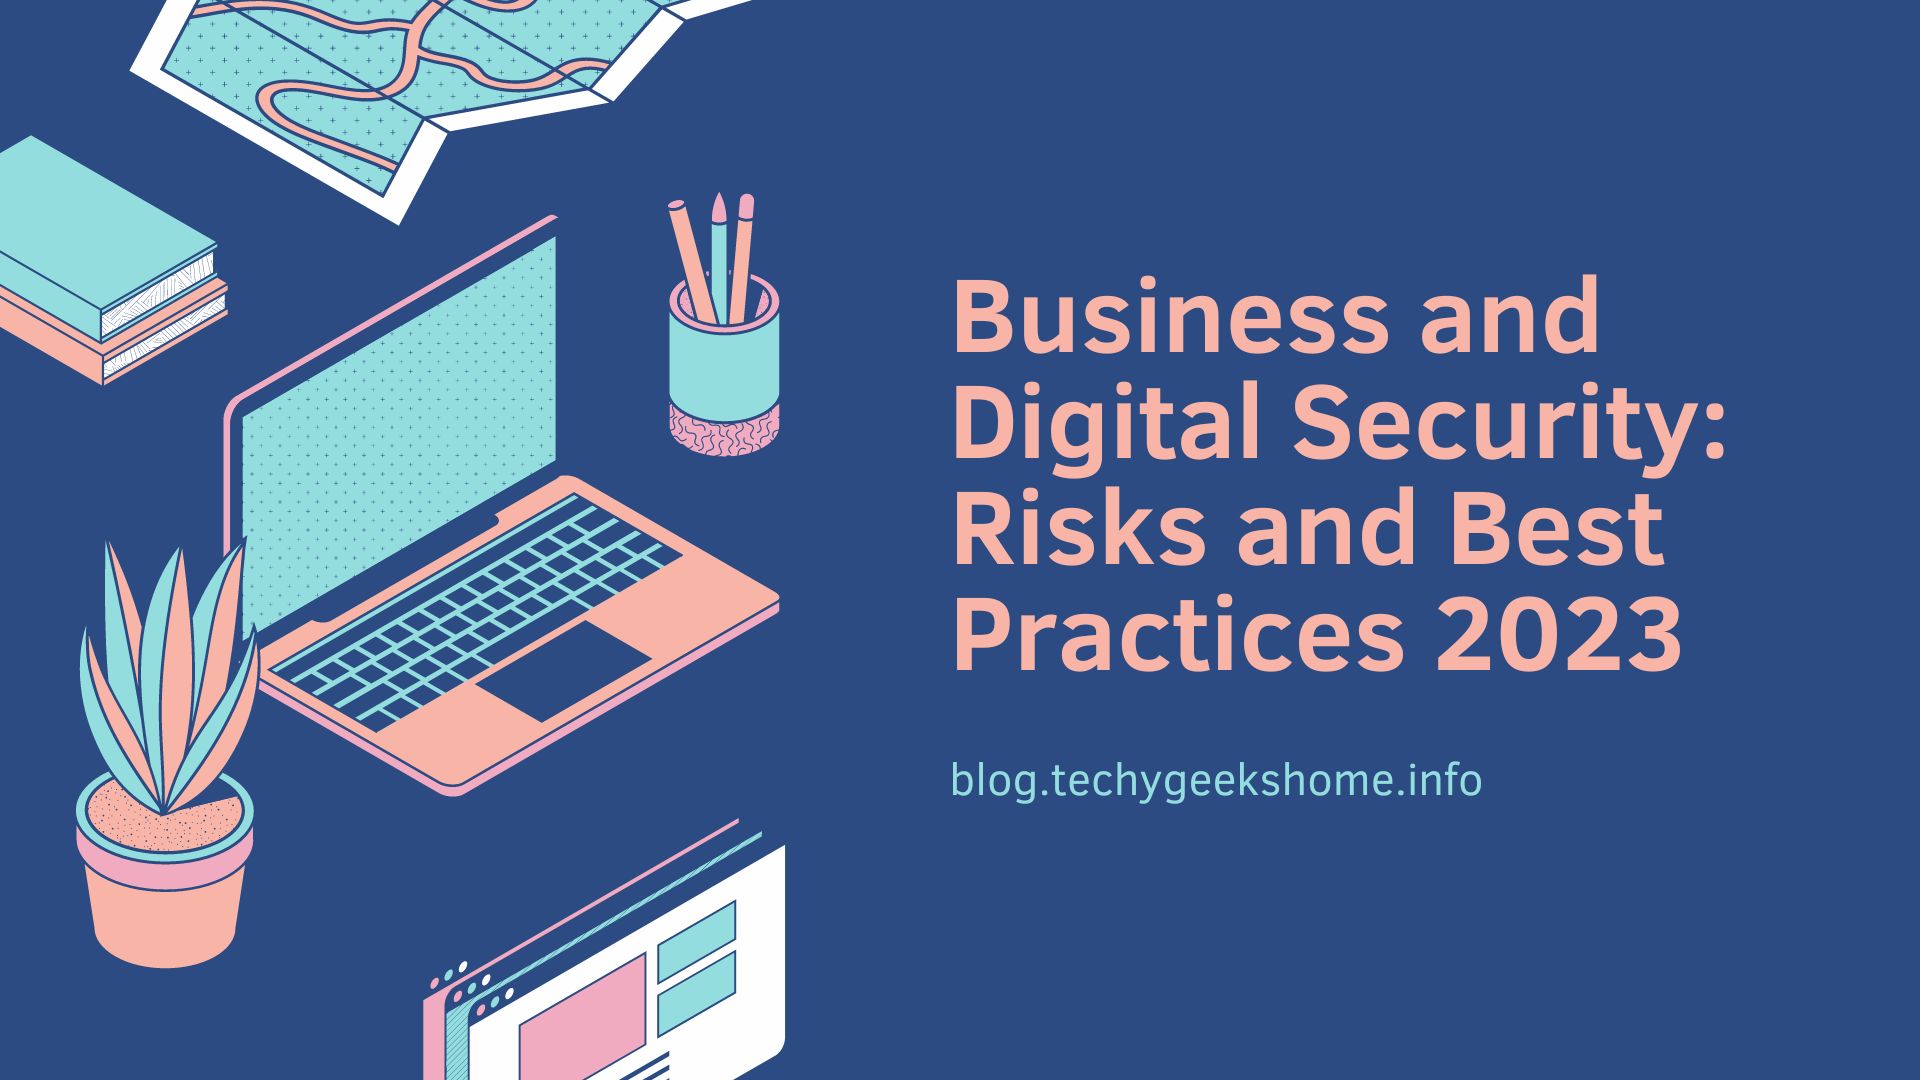 Business and Digital Security Risks and Best Practices 2023